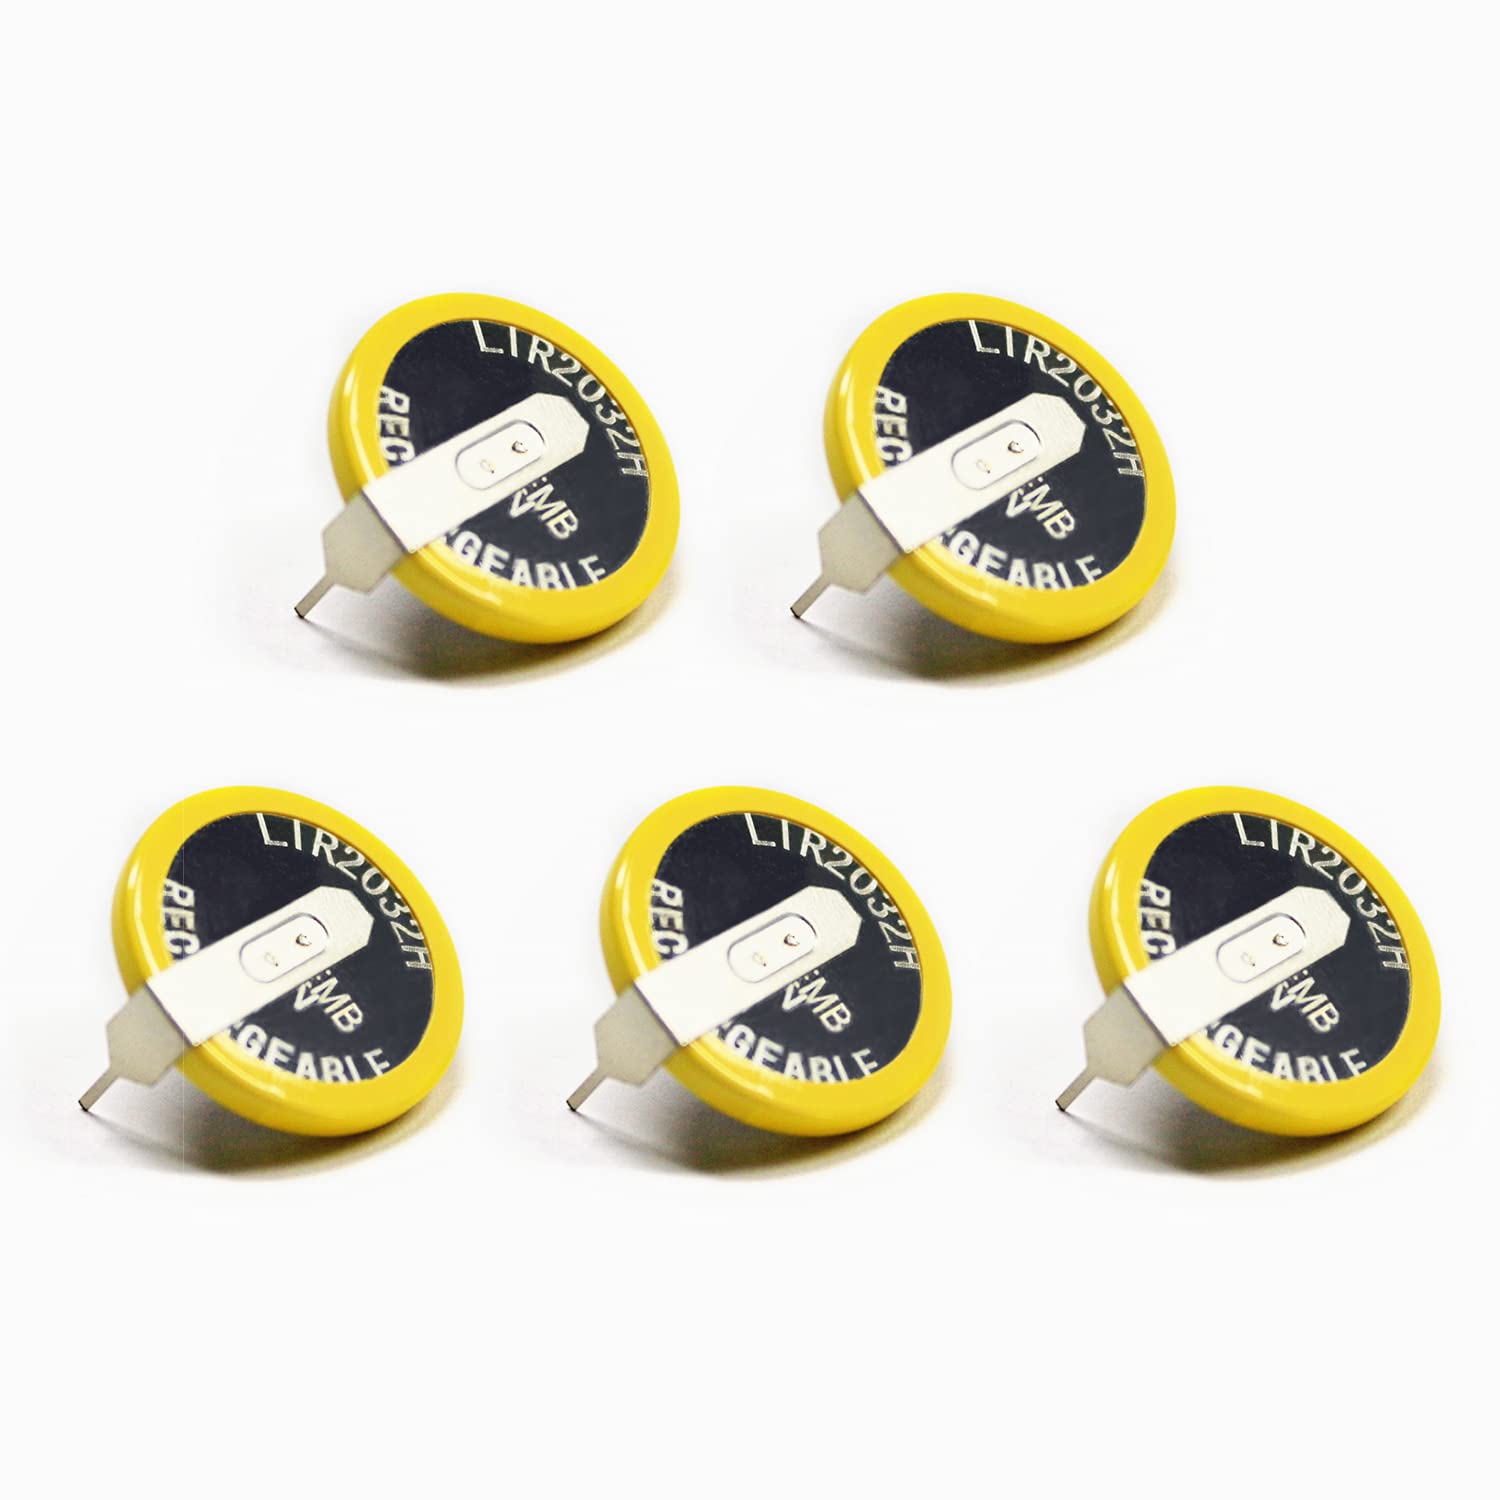 5PCS EEMB LIR2032H Rechargeable Battery 70mah 3.7V Lithium-ion Coin Button Cell Batteries with Solder Tabs